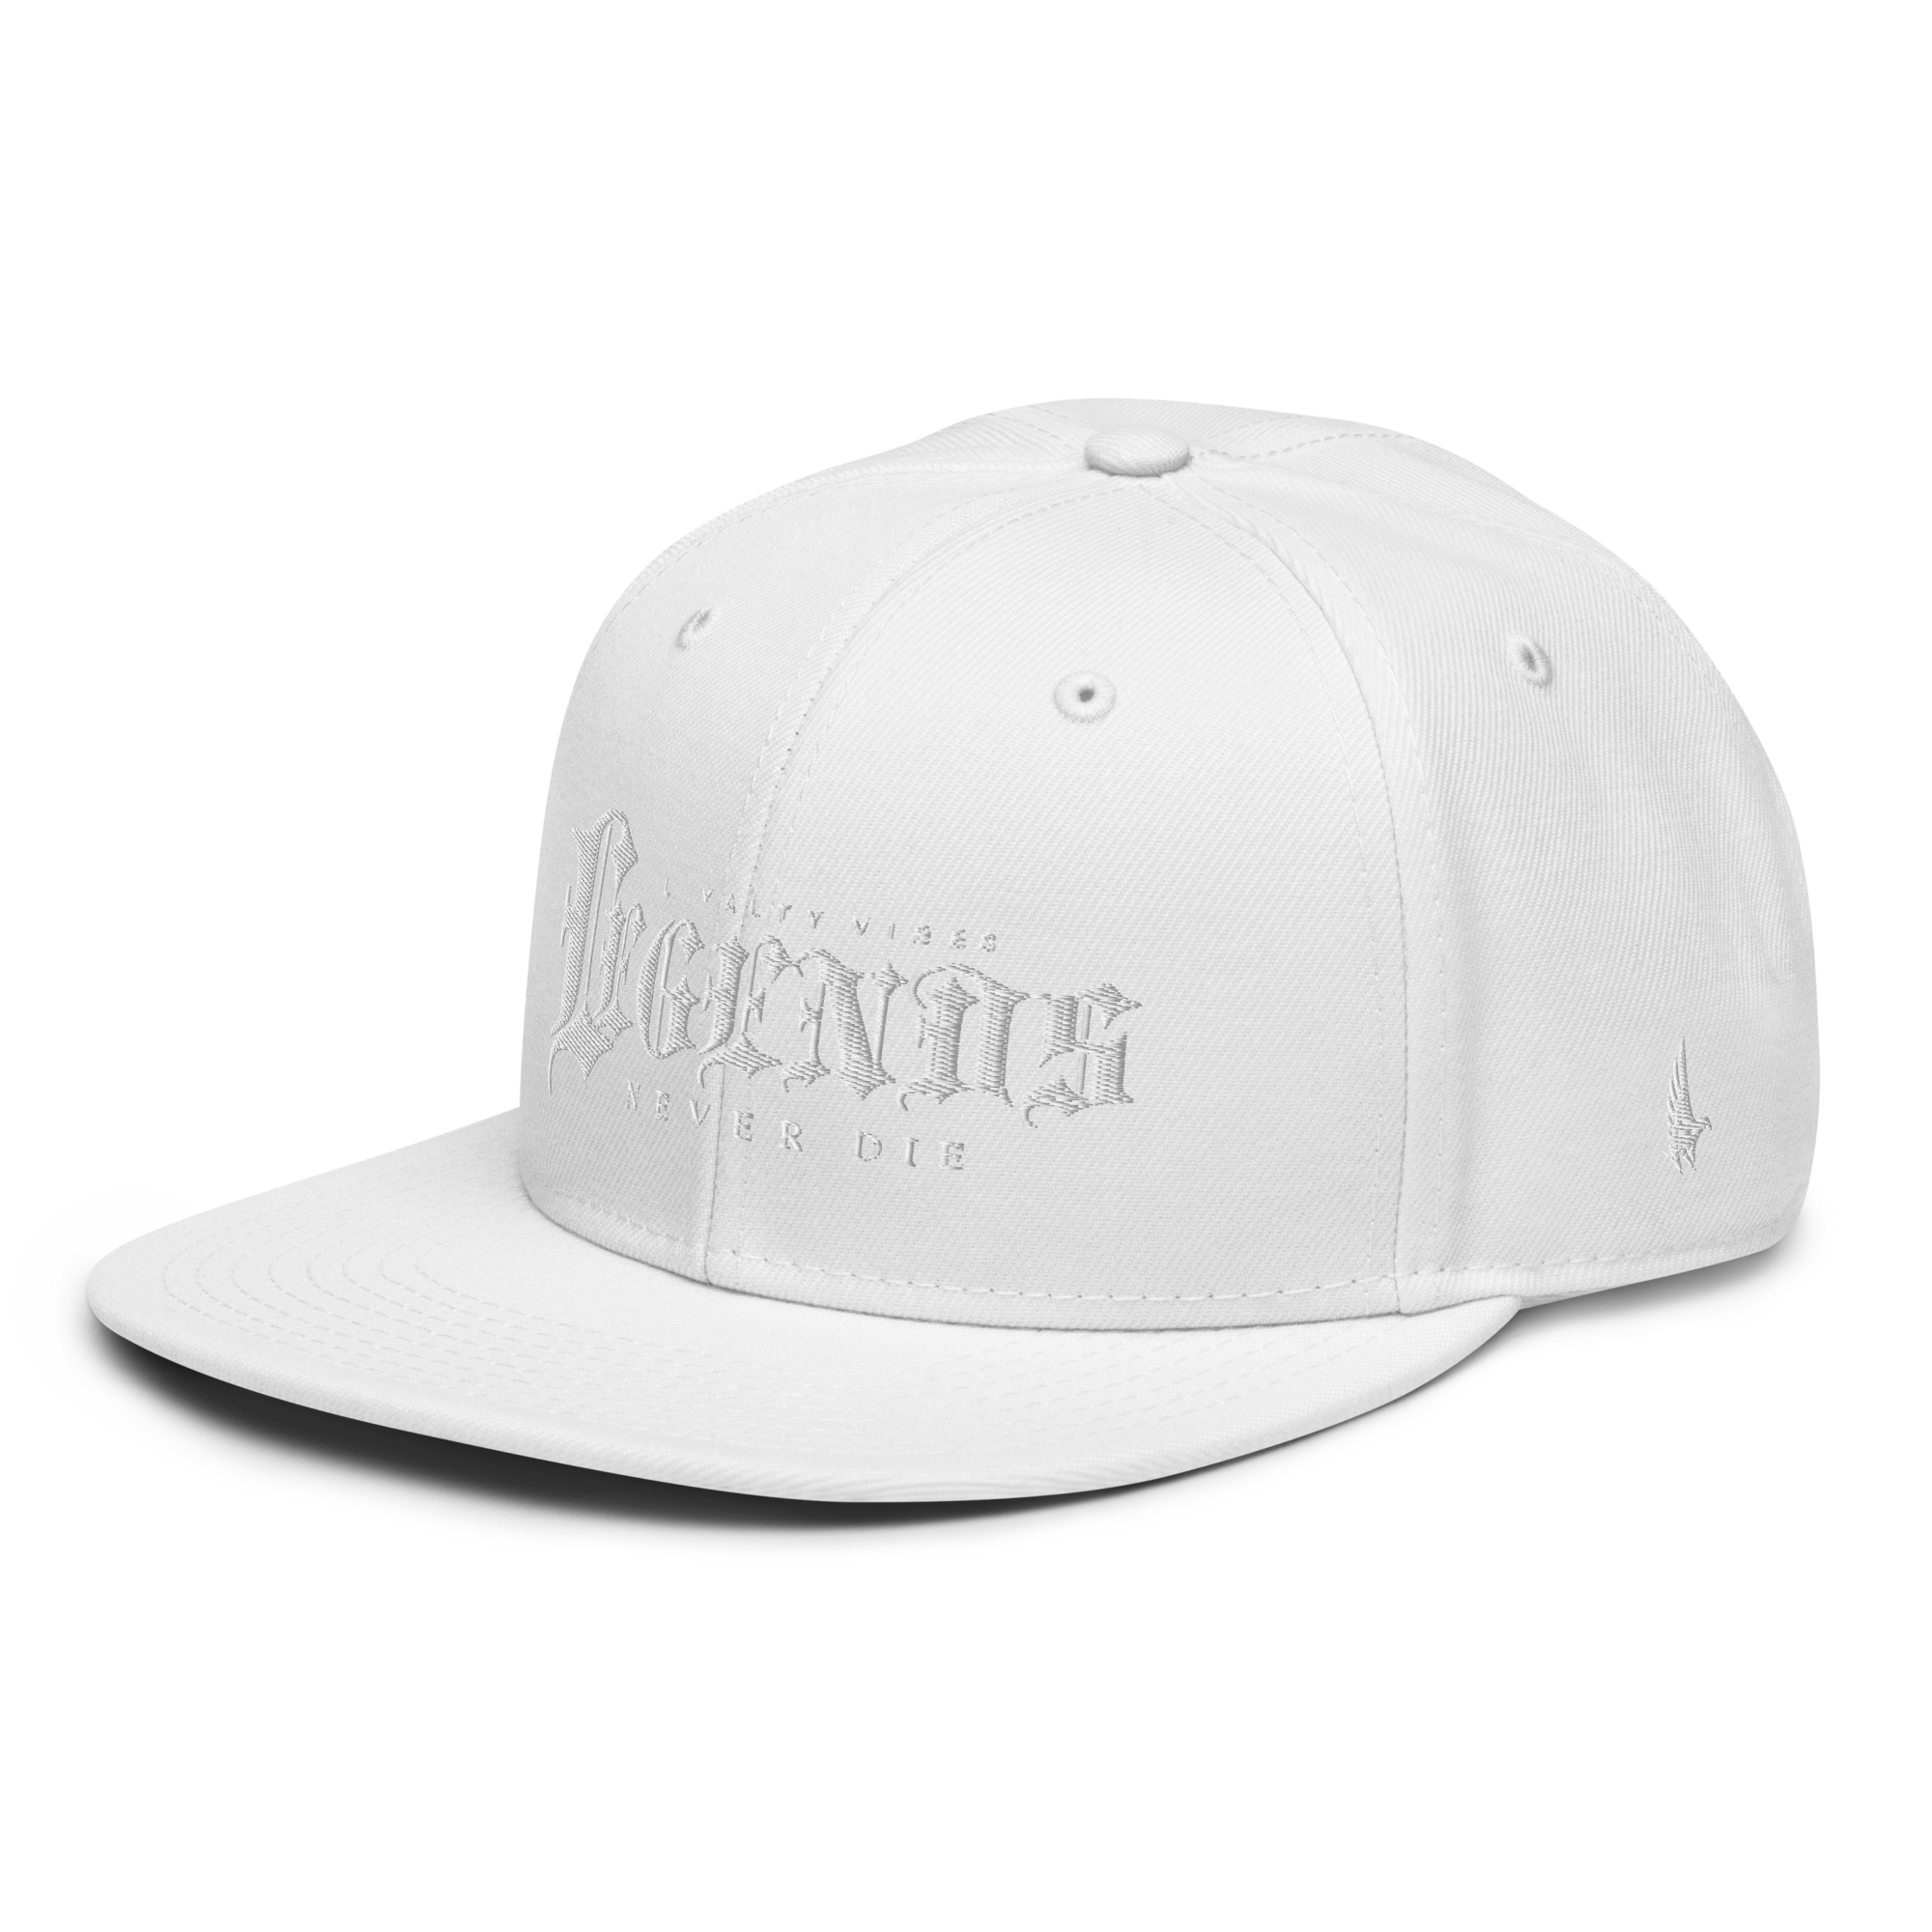 Legends Never Die Snapback Hat White Stealth OS - Loyalty Vibes